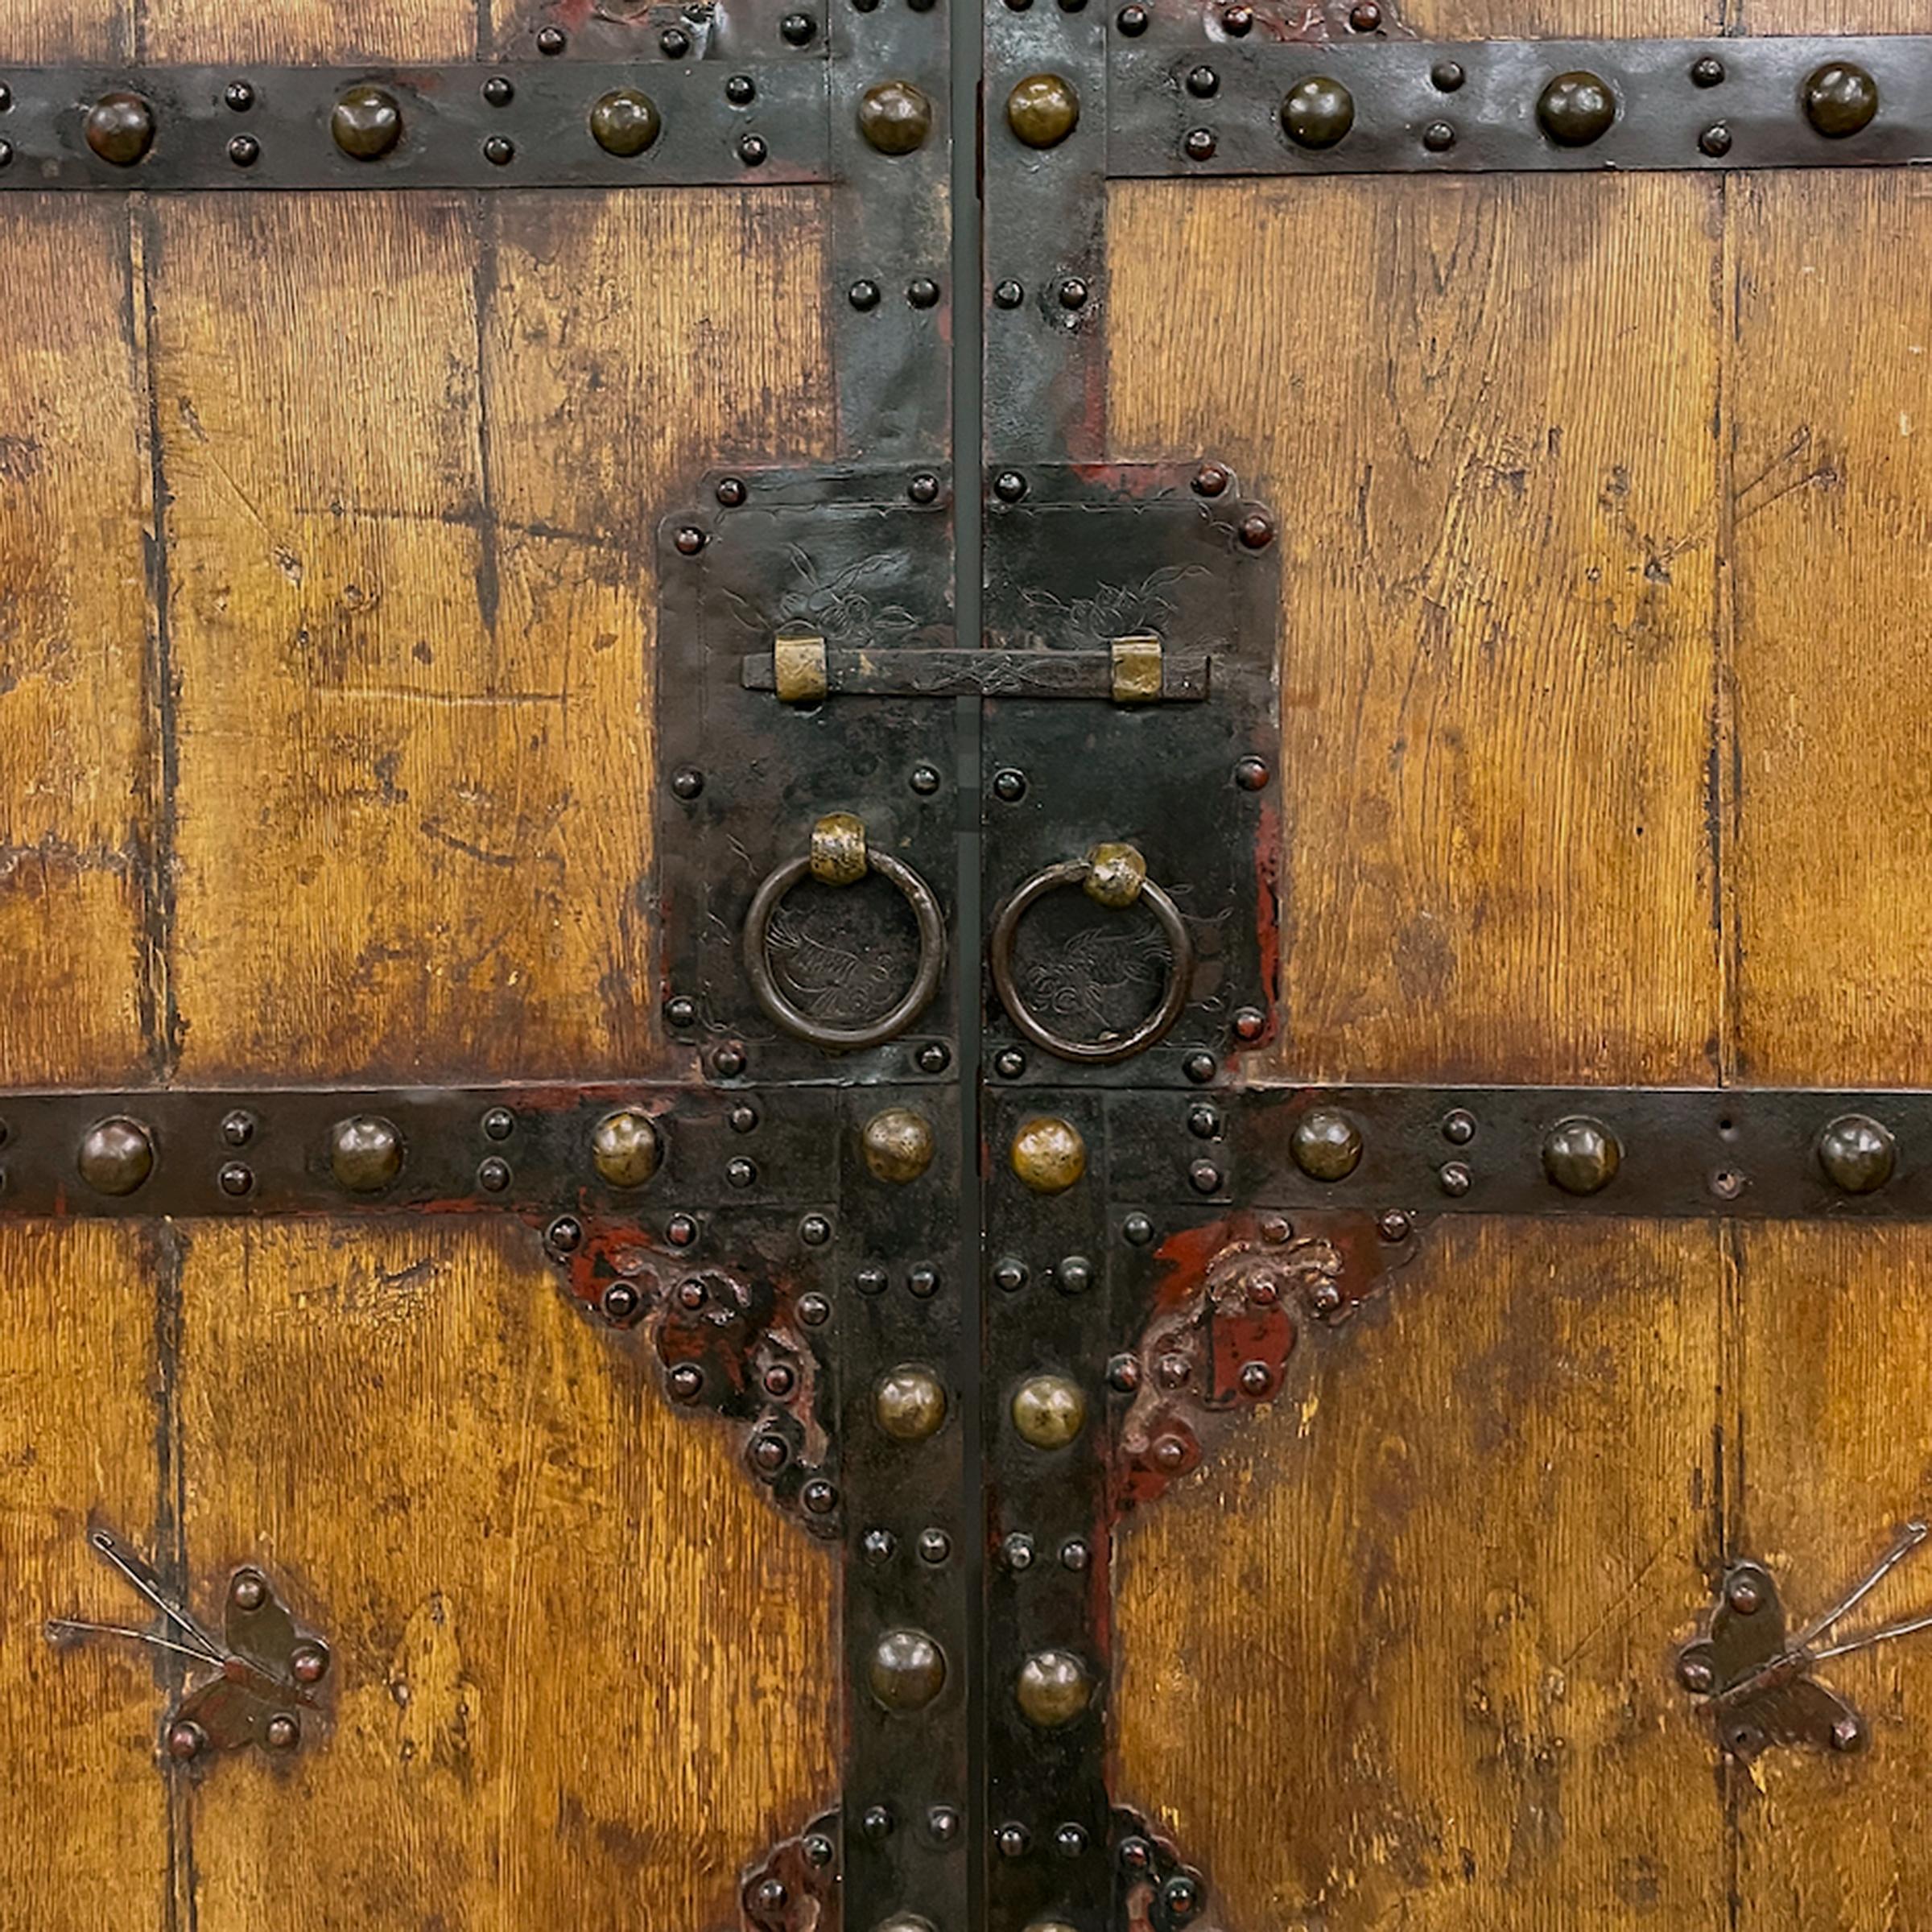 This imposing set of doors dates to the mid-19th century and once enclosed the inner courtyard of a Qing-dynasty home in northern China. The double doors are crafted of northern elm (yumu), a common hardwood appreciated for its strength, warm